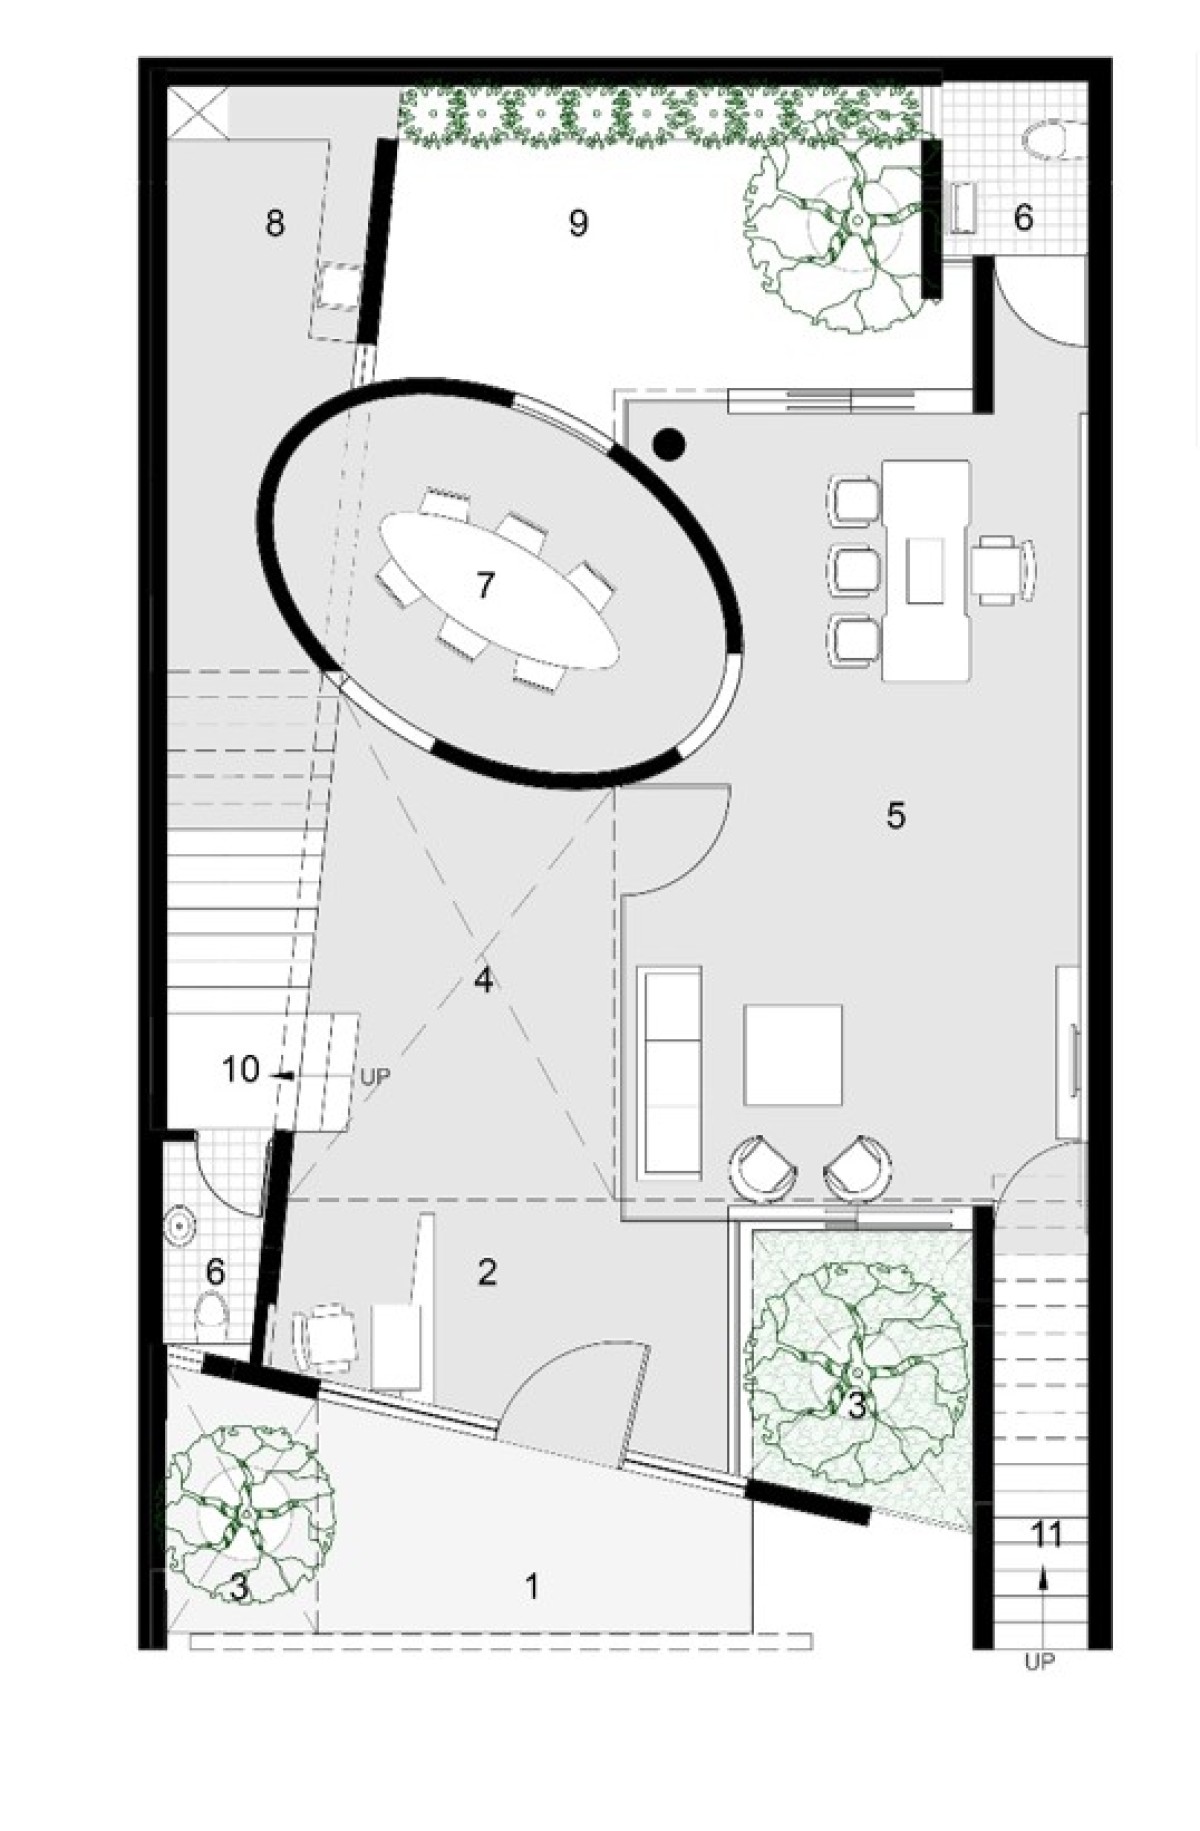 Ground floor plan of Office 543 by Charged Voids